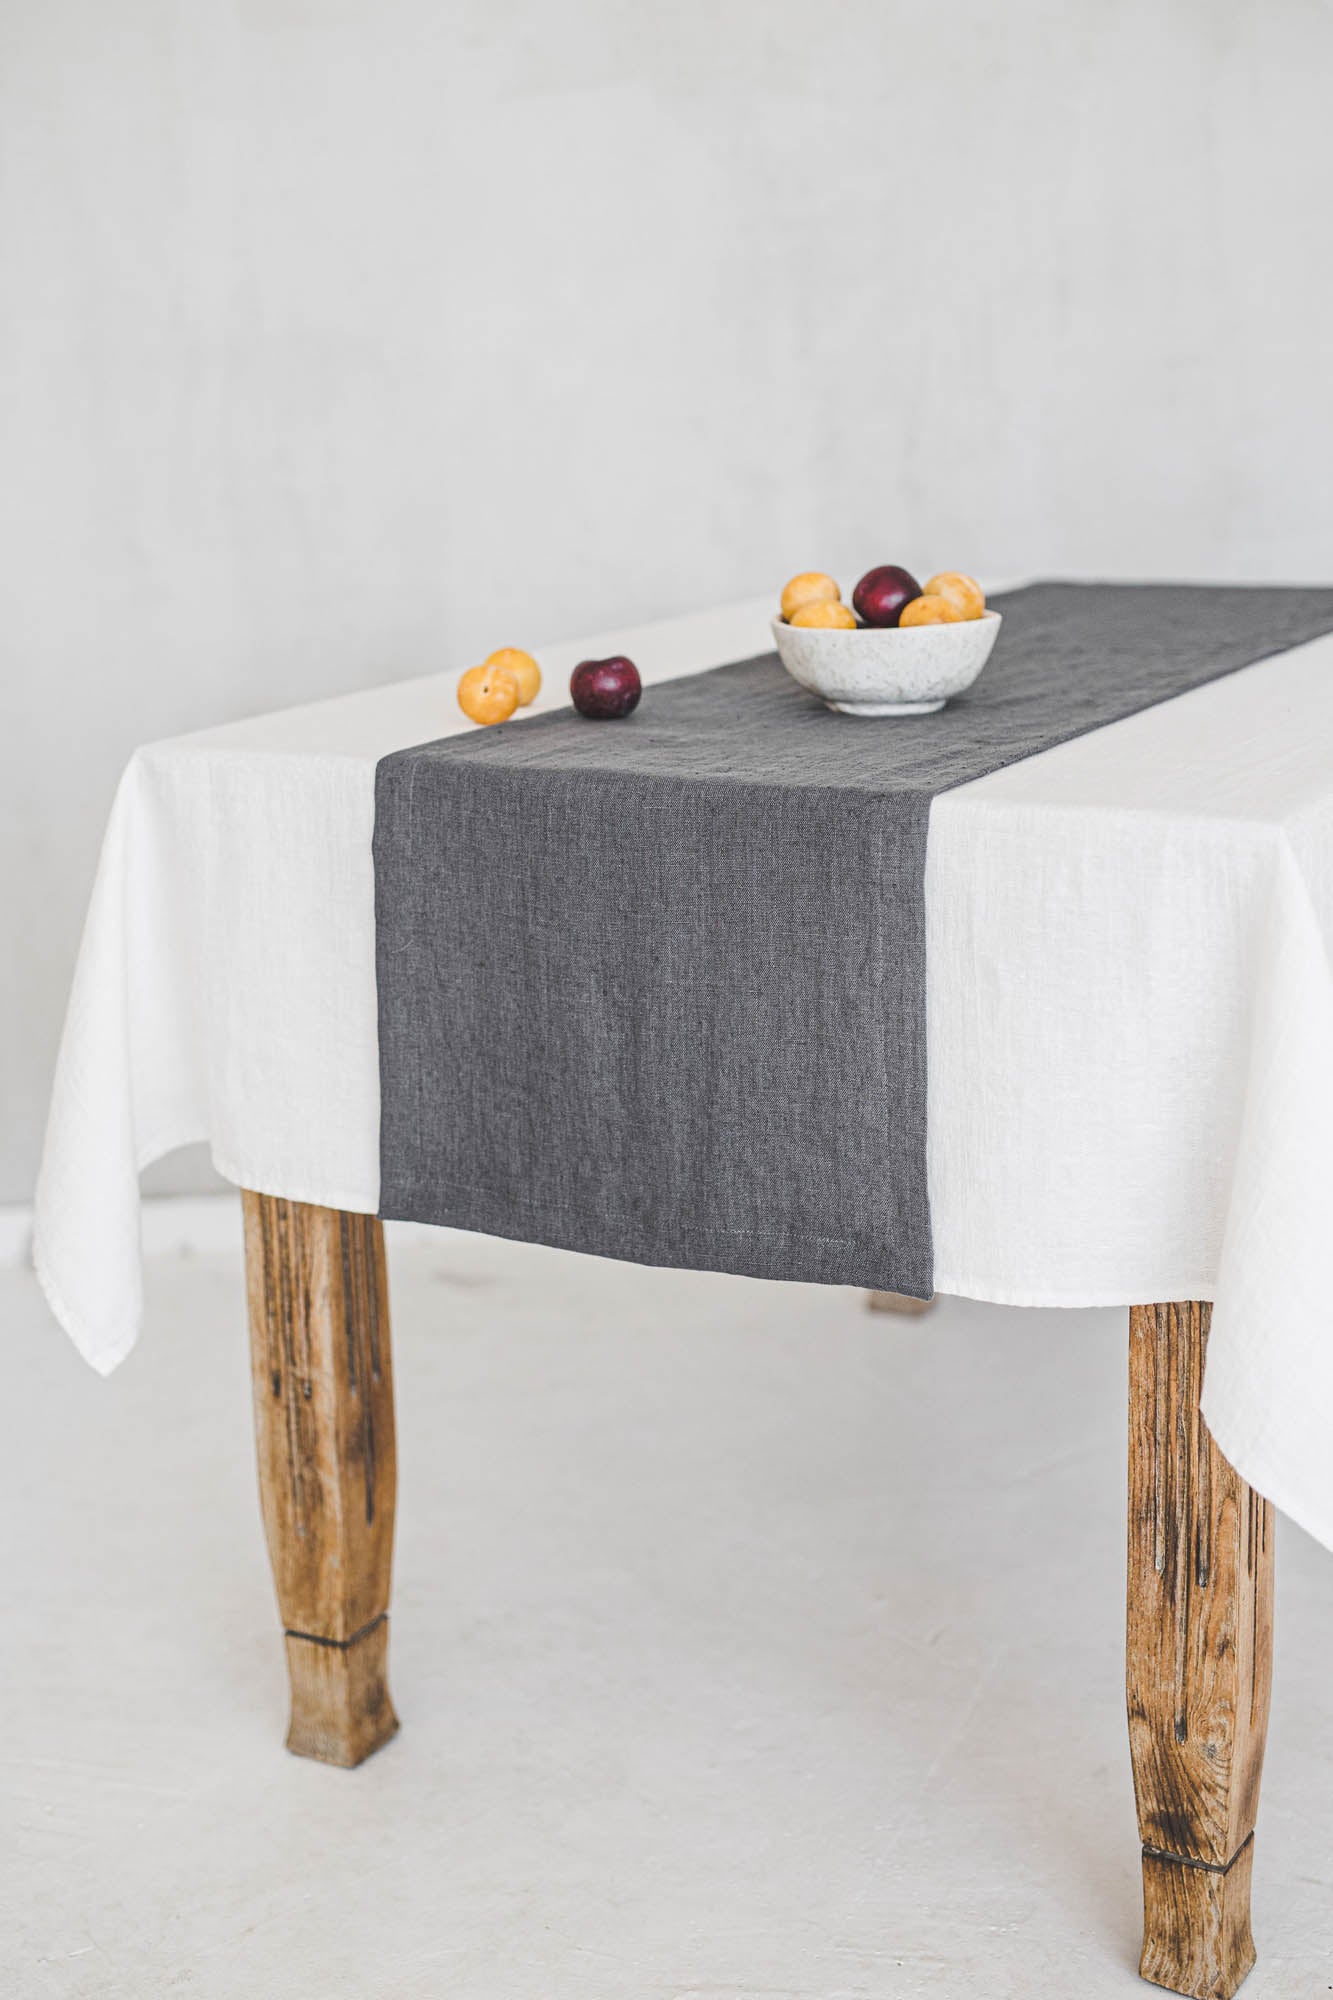 Charcoal gray linen table runner with mitered corners